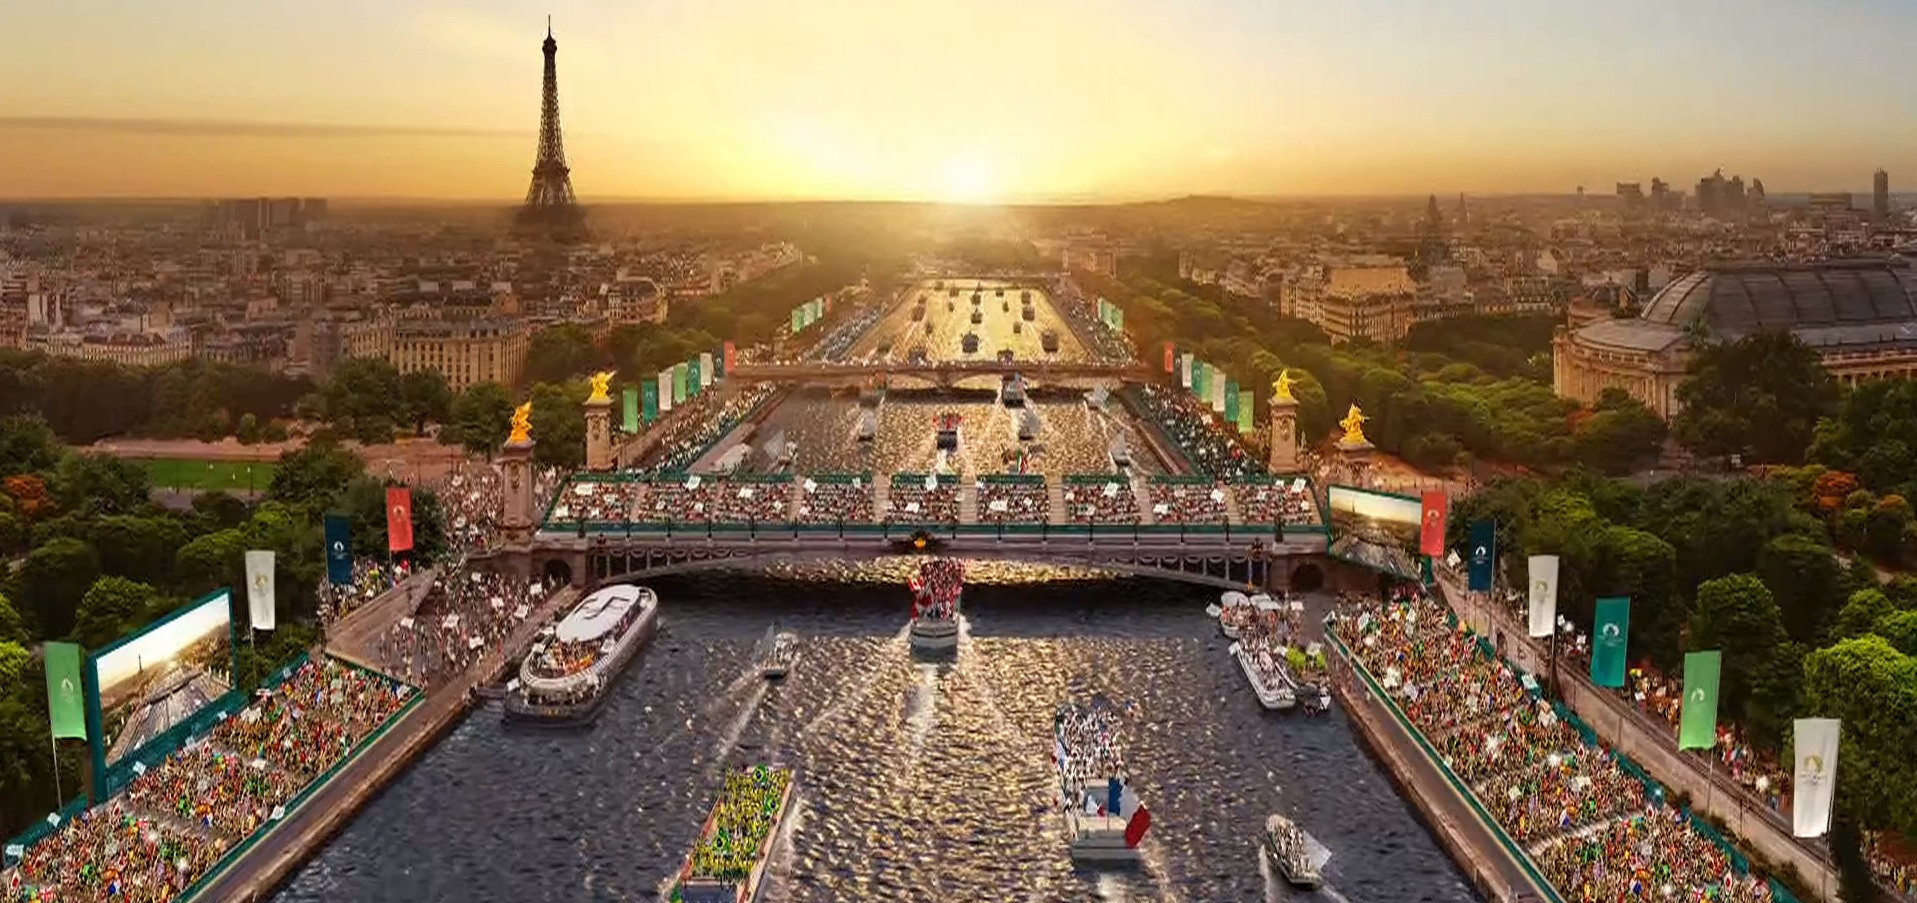 Security is a key concern for Paris 2024 given organisers' ambitious plans for 600,000 people to watch the Opening Ceremony along the banks of the Seine ©Paris 2024